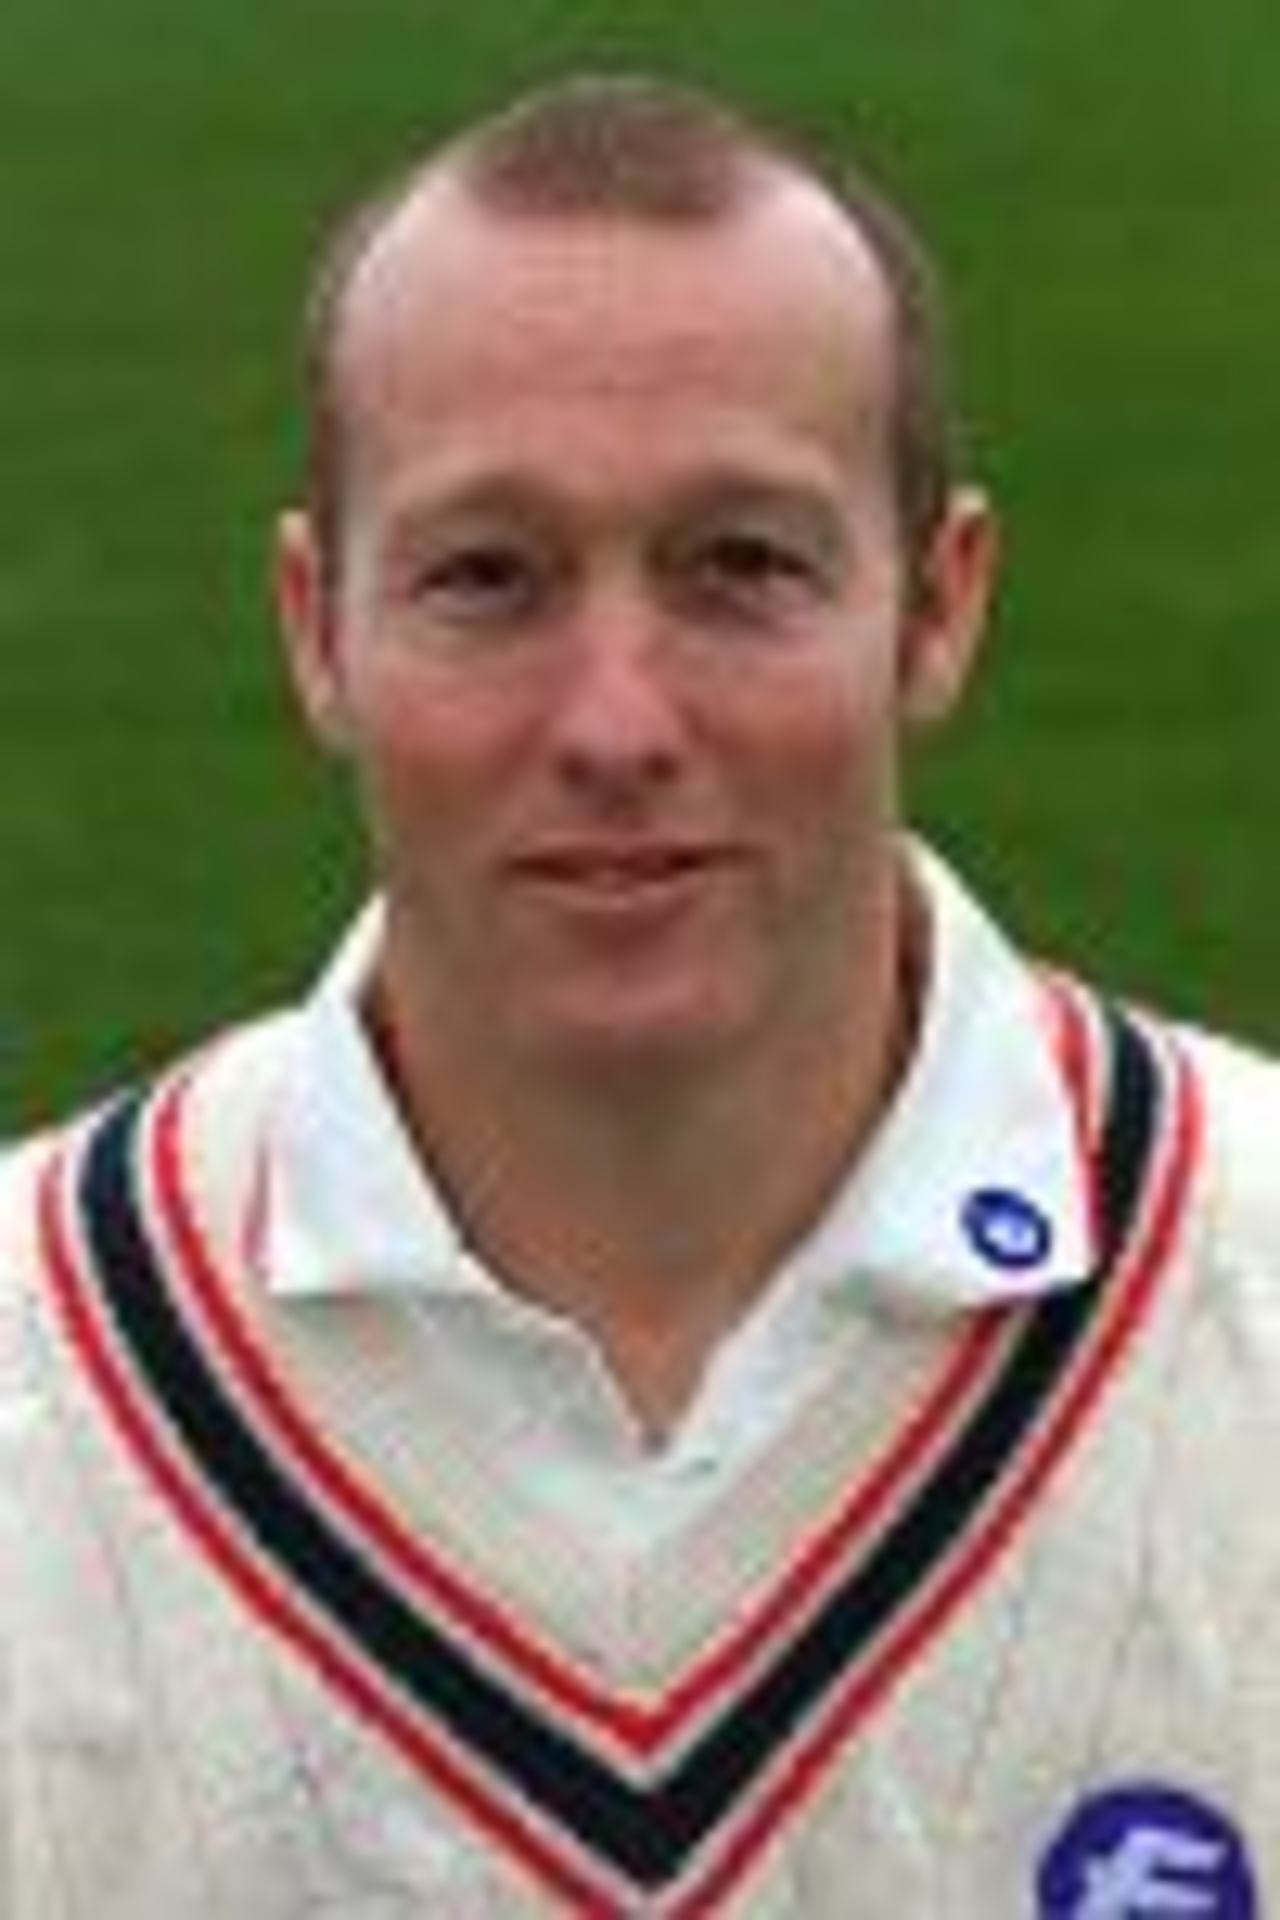 Taking at the Leics CCC photocall , April 2001